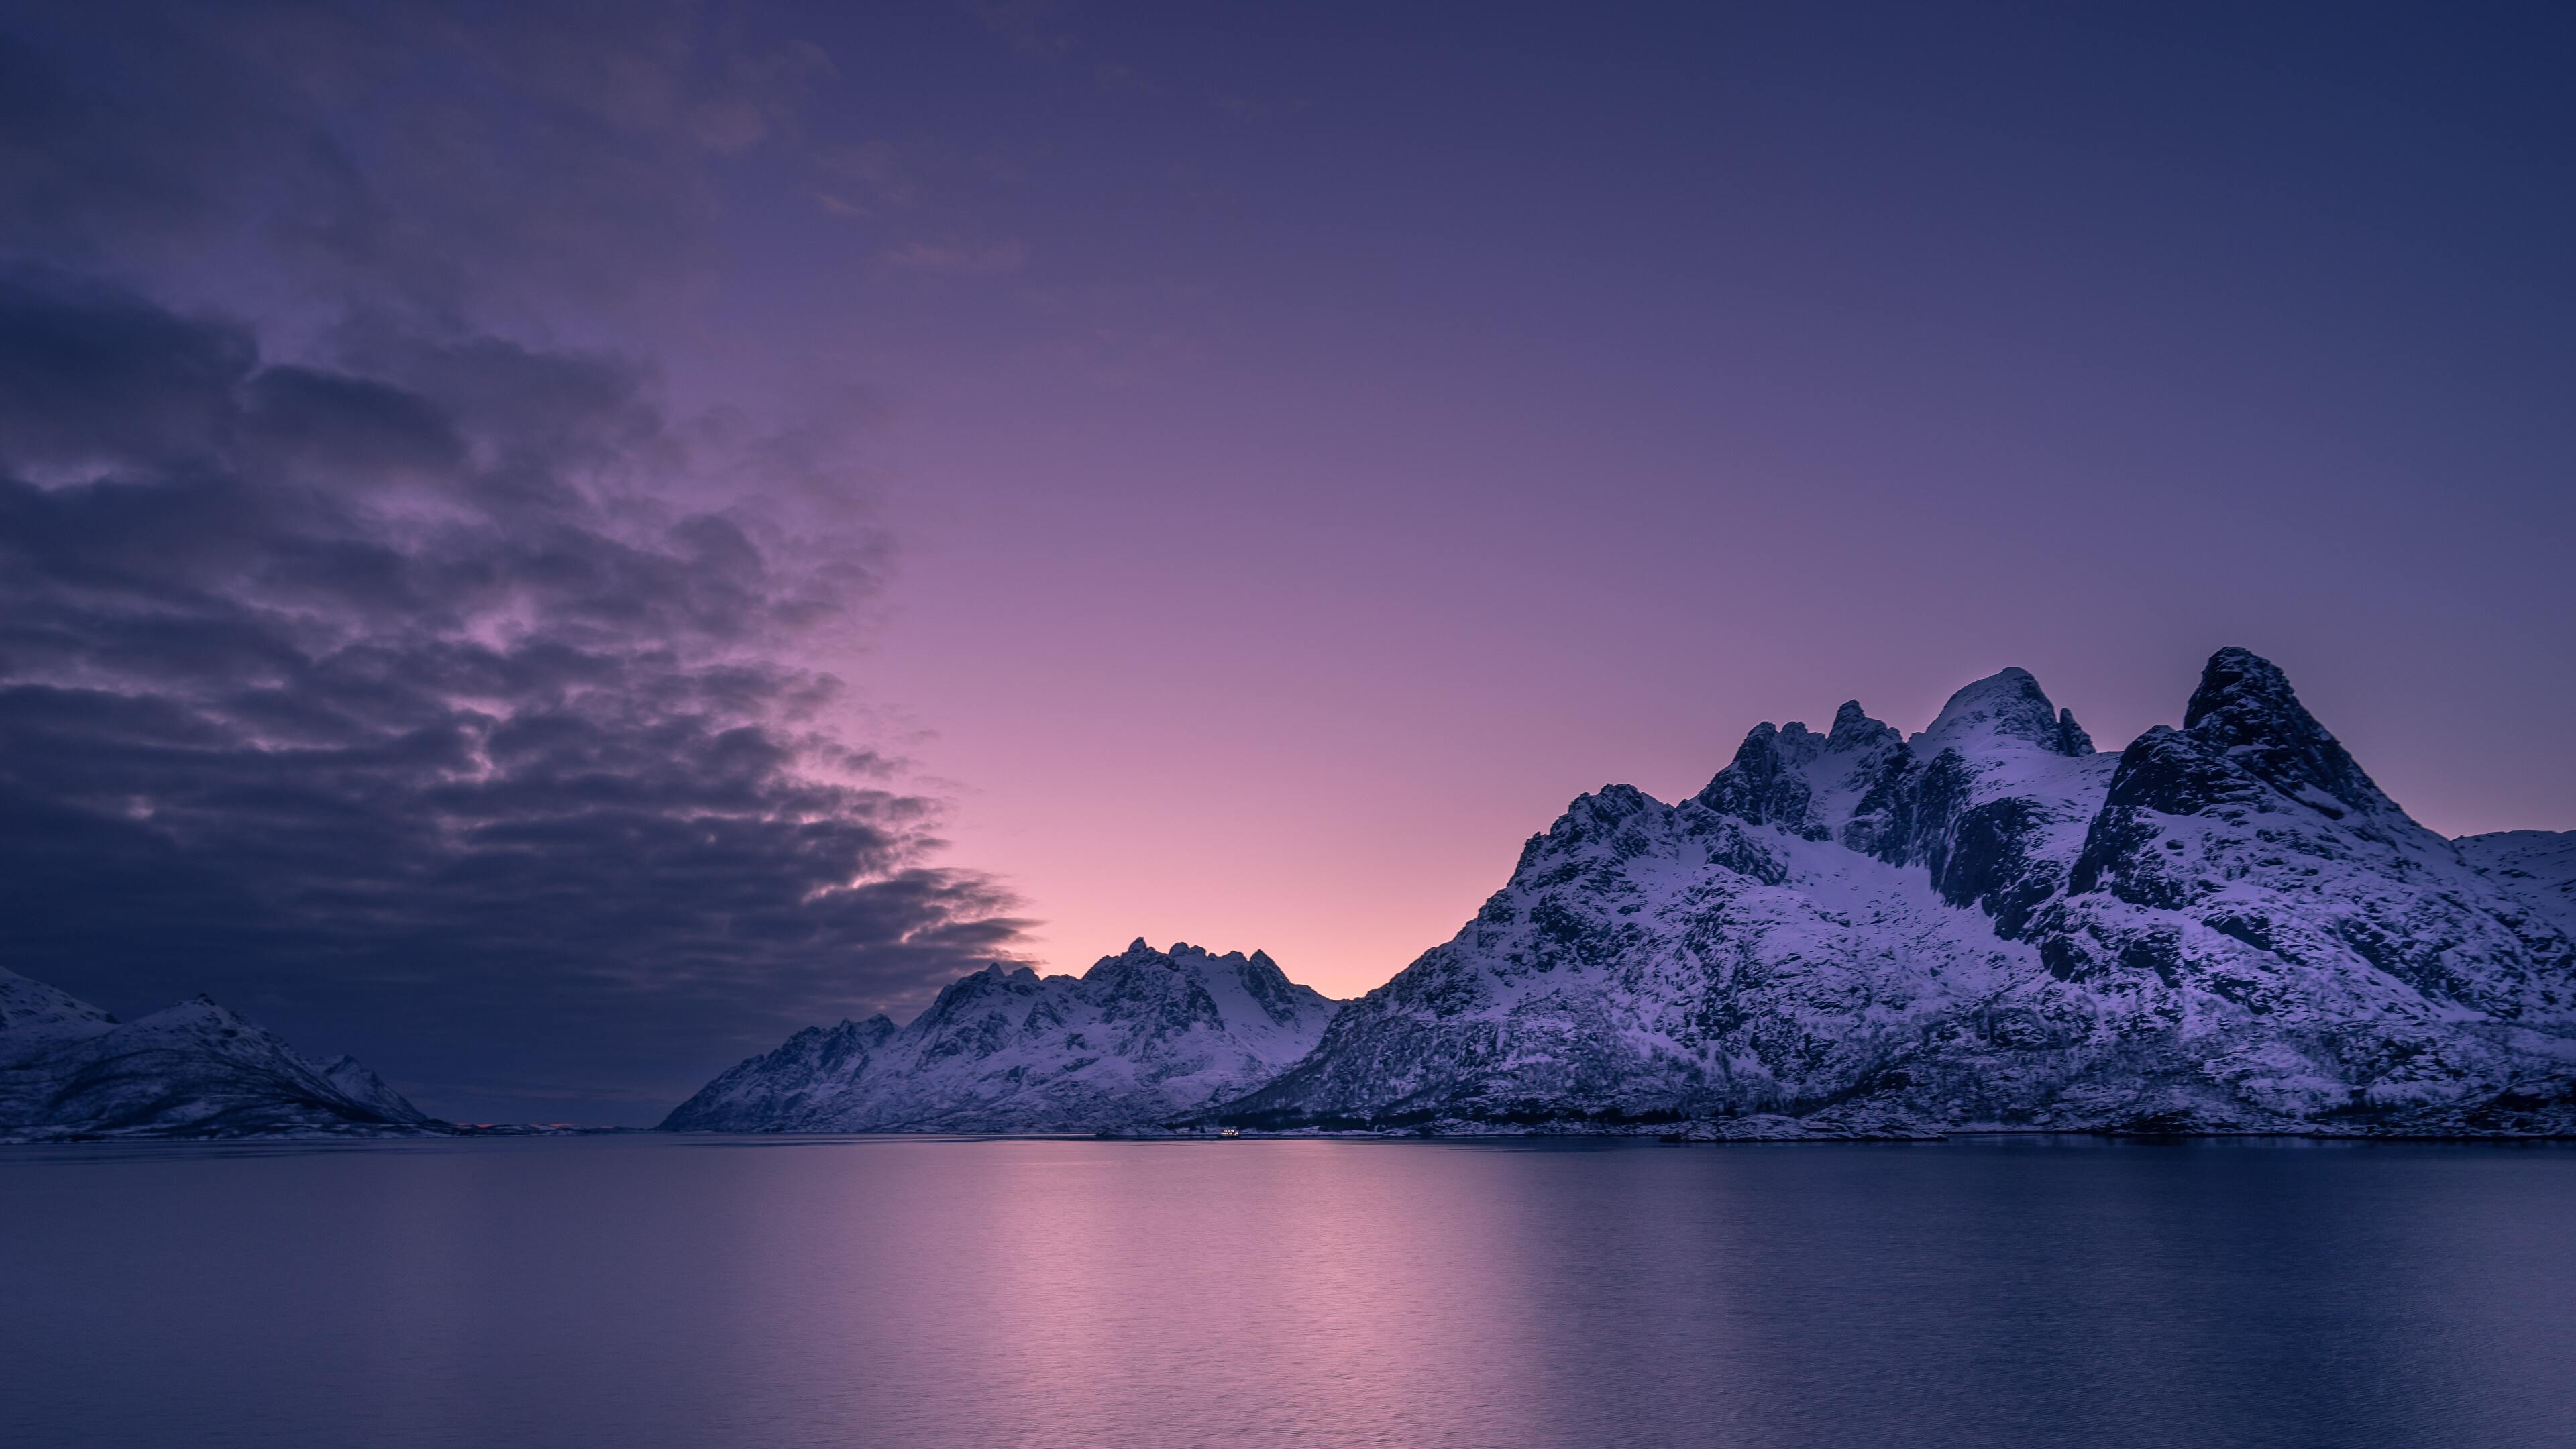 Norway 4K wallpaper for your desktop or mobile screen free and easy to download